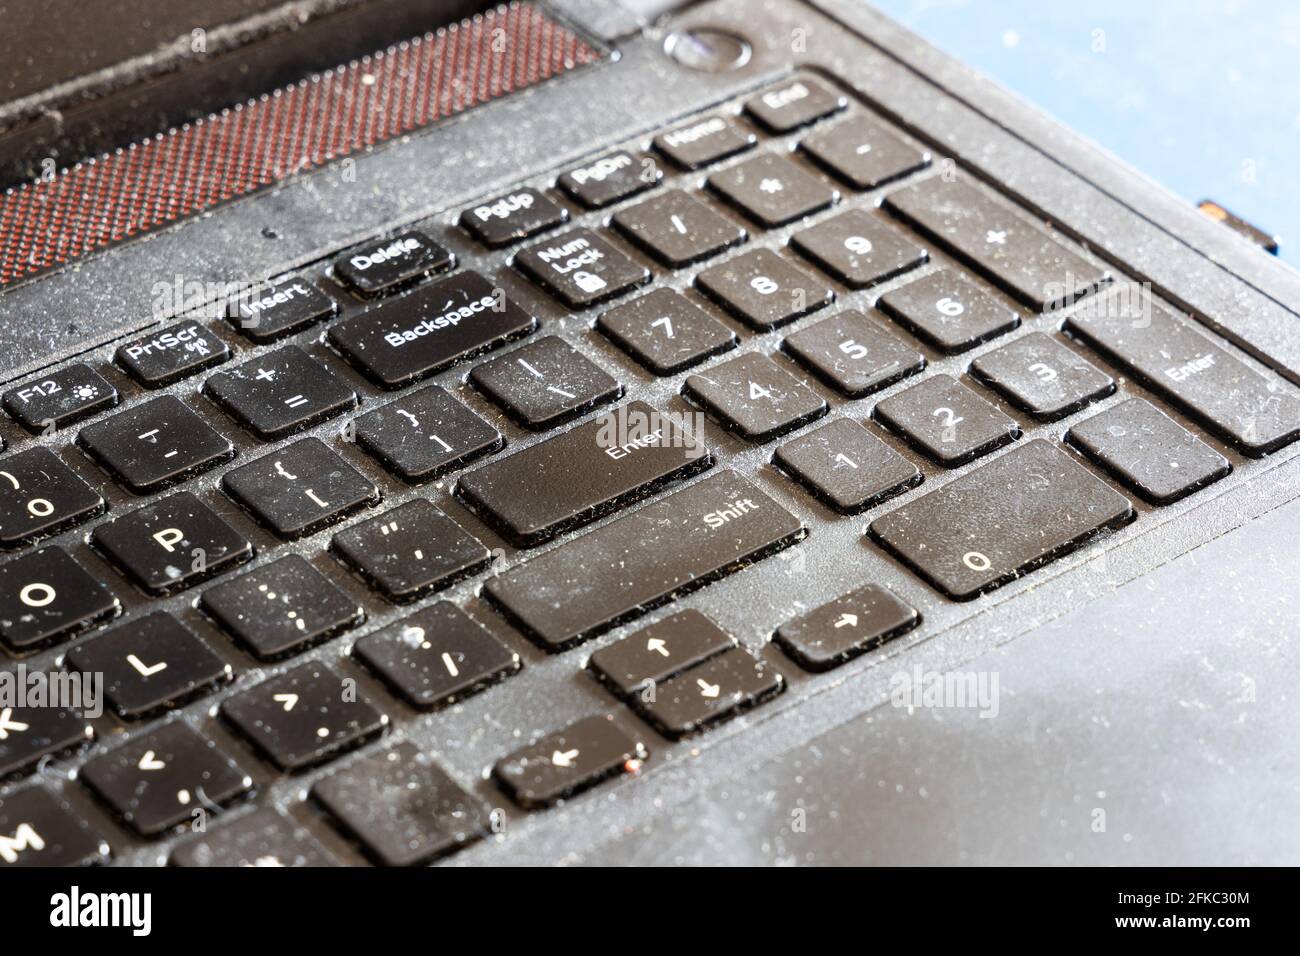 Close-up on dirty and unhygienic computer laptop keyboard, full of dust and particles Stock Photo